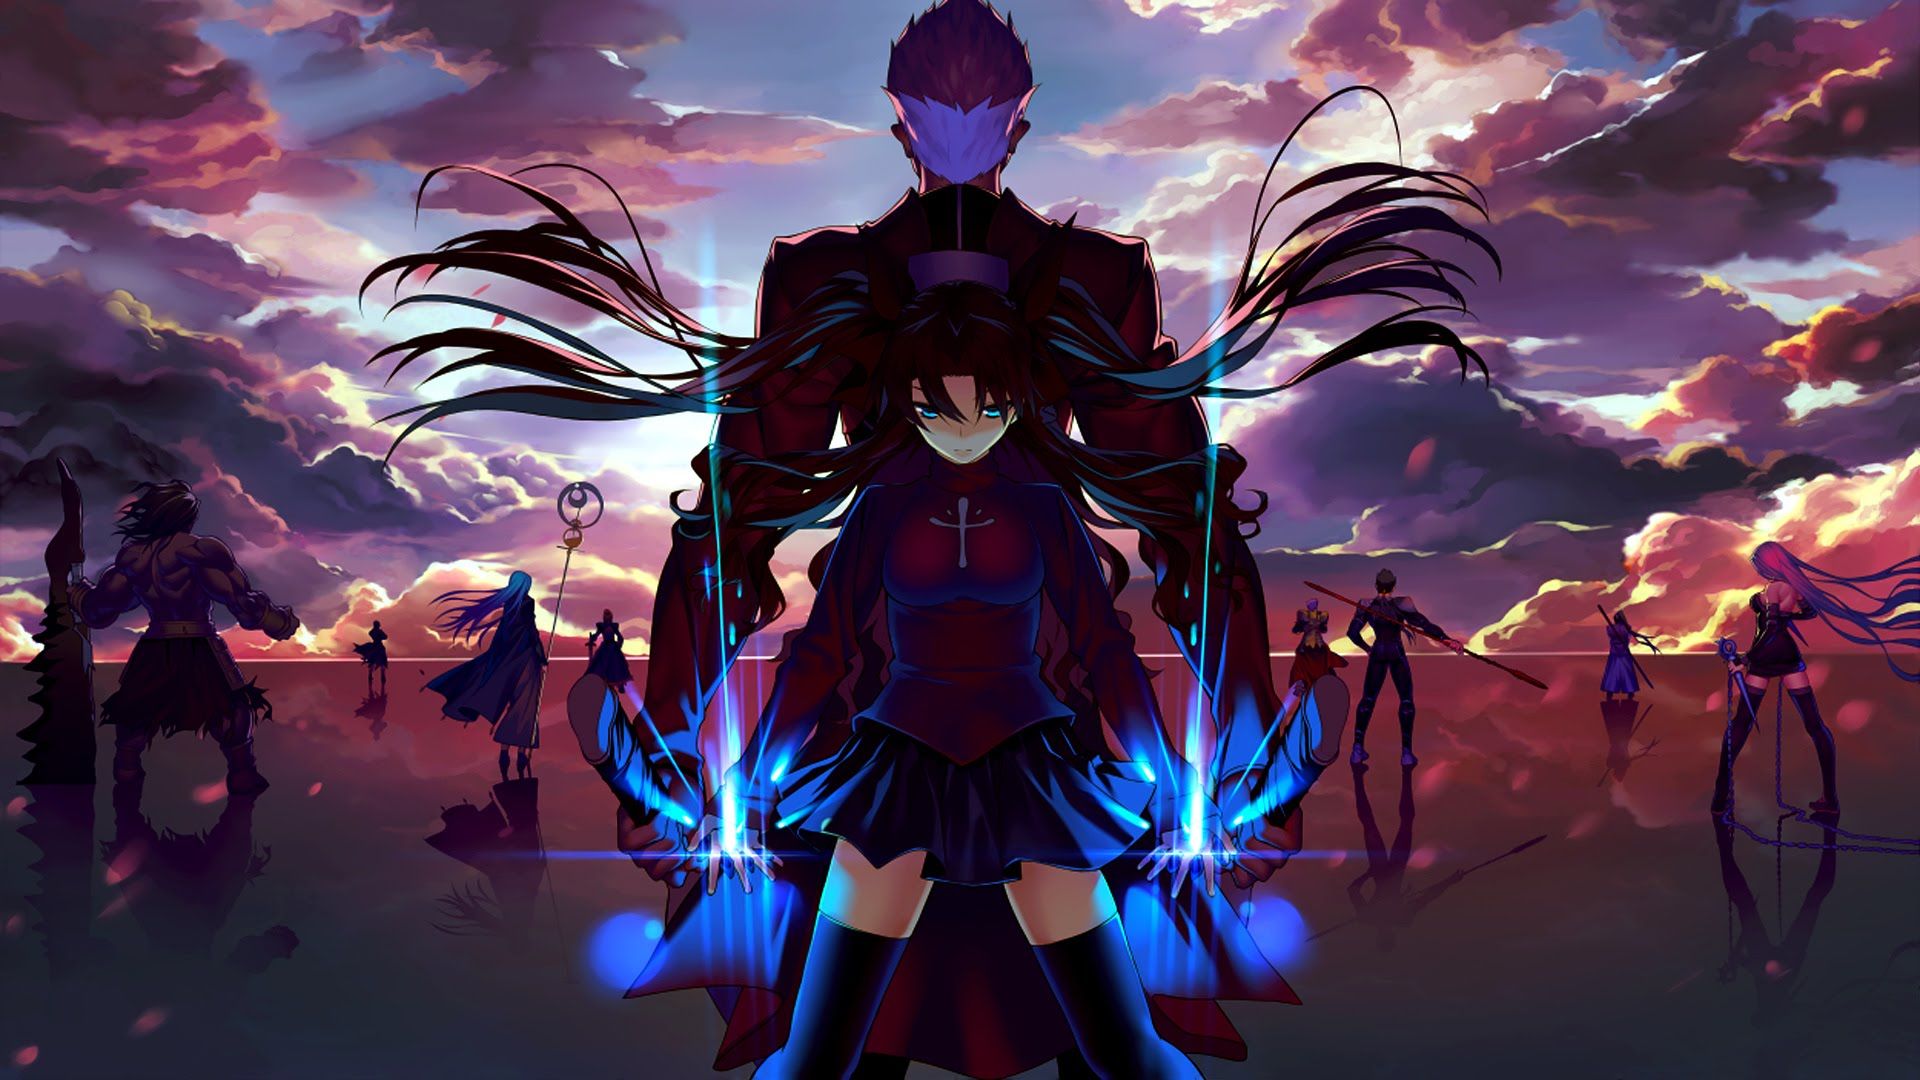 Fate Stay Night: Unlimited Blade Works wallpaper, Anime, HQ Fate